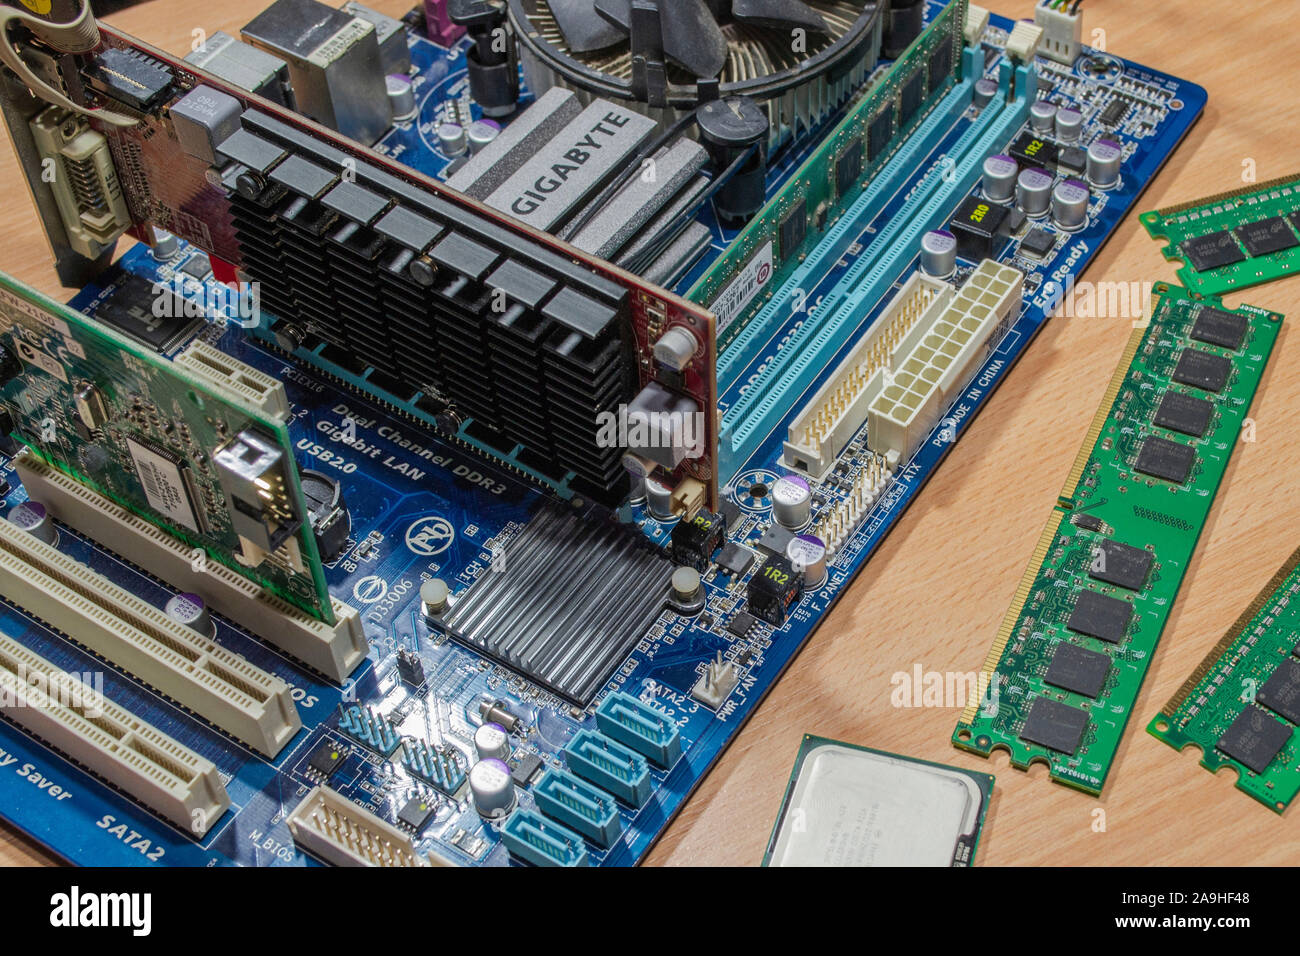 Gigabyte motherboard with Graphics card, RAM and processor Stock Photo